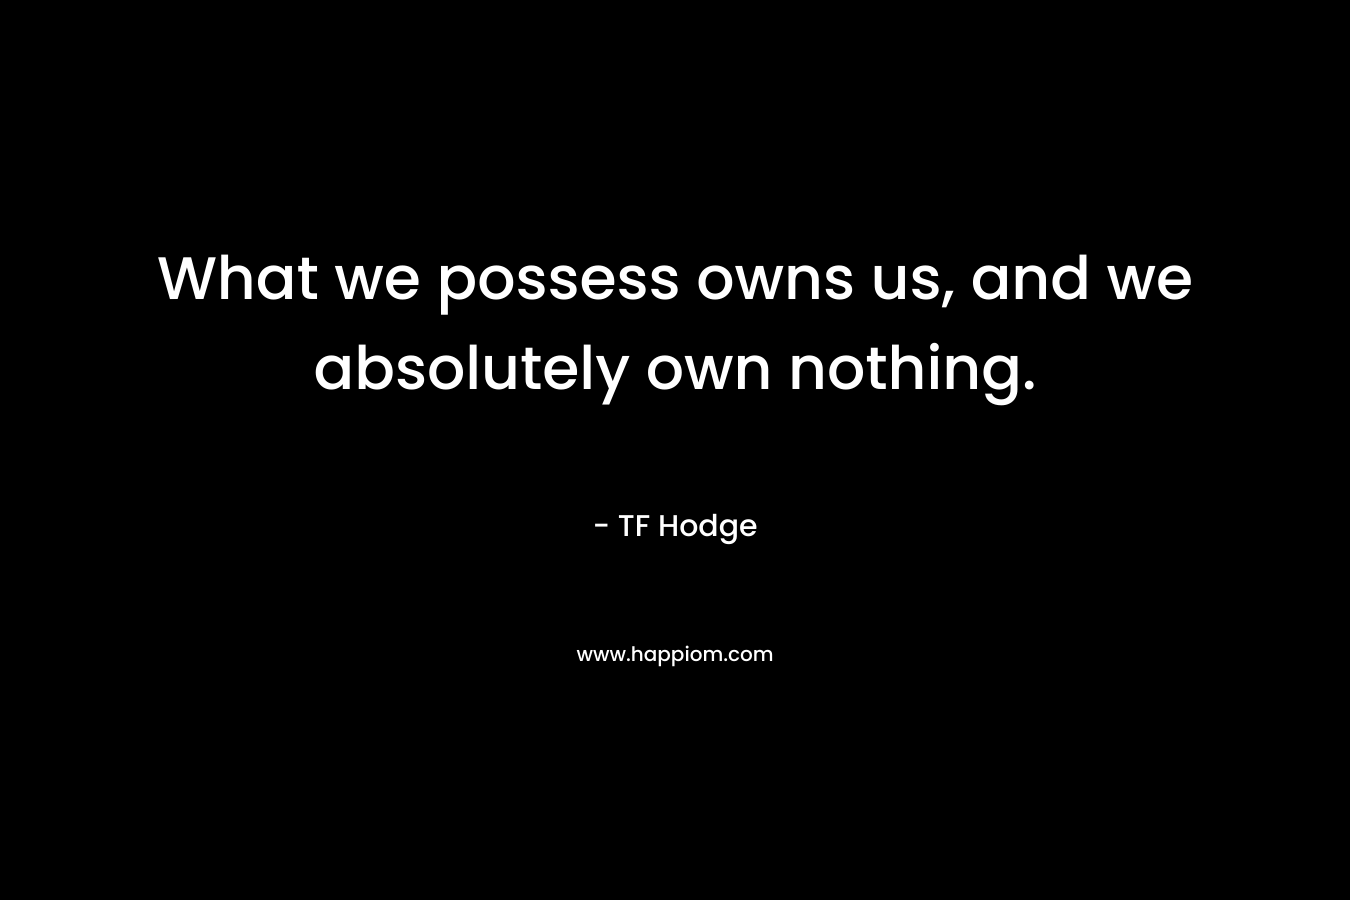 What we possess owns us, and we absolutely own nothing. – TF Hodge